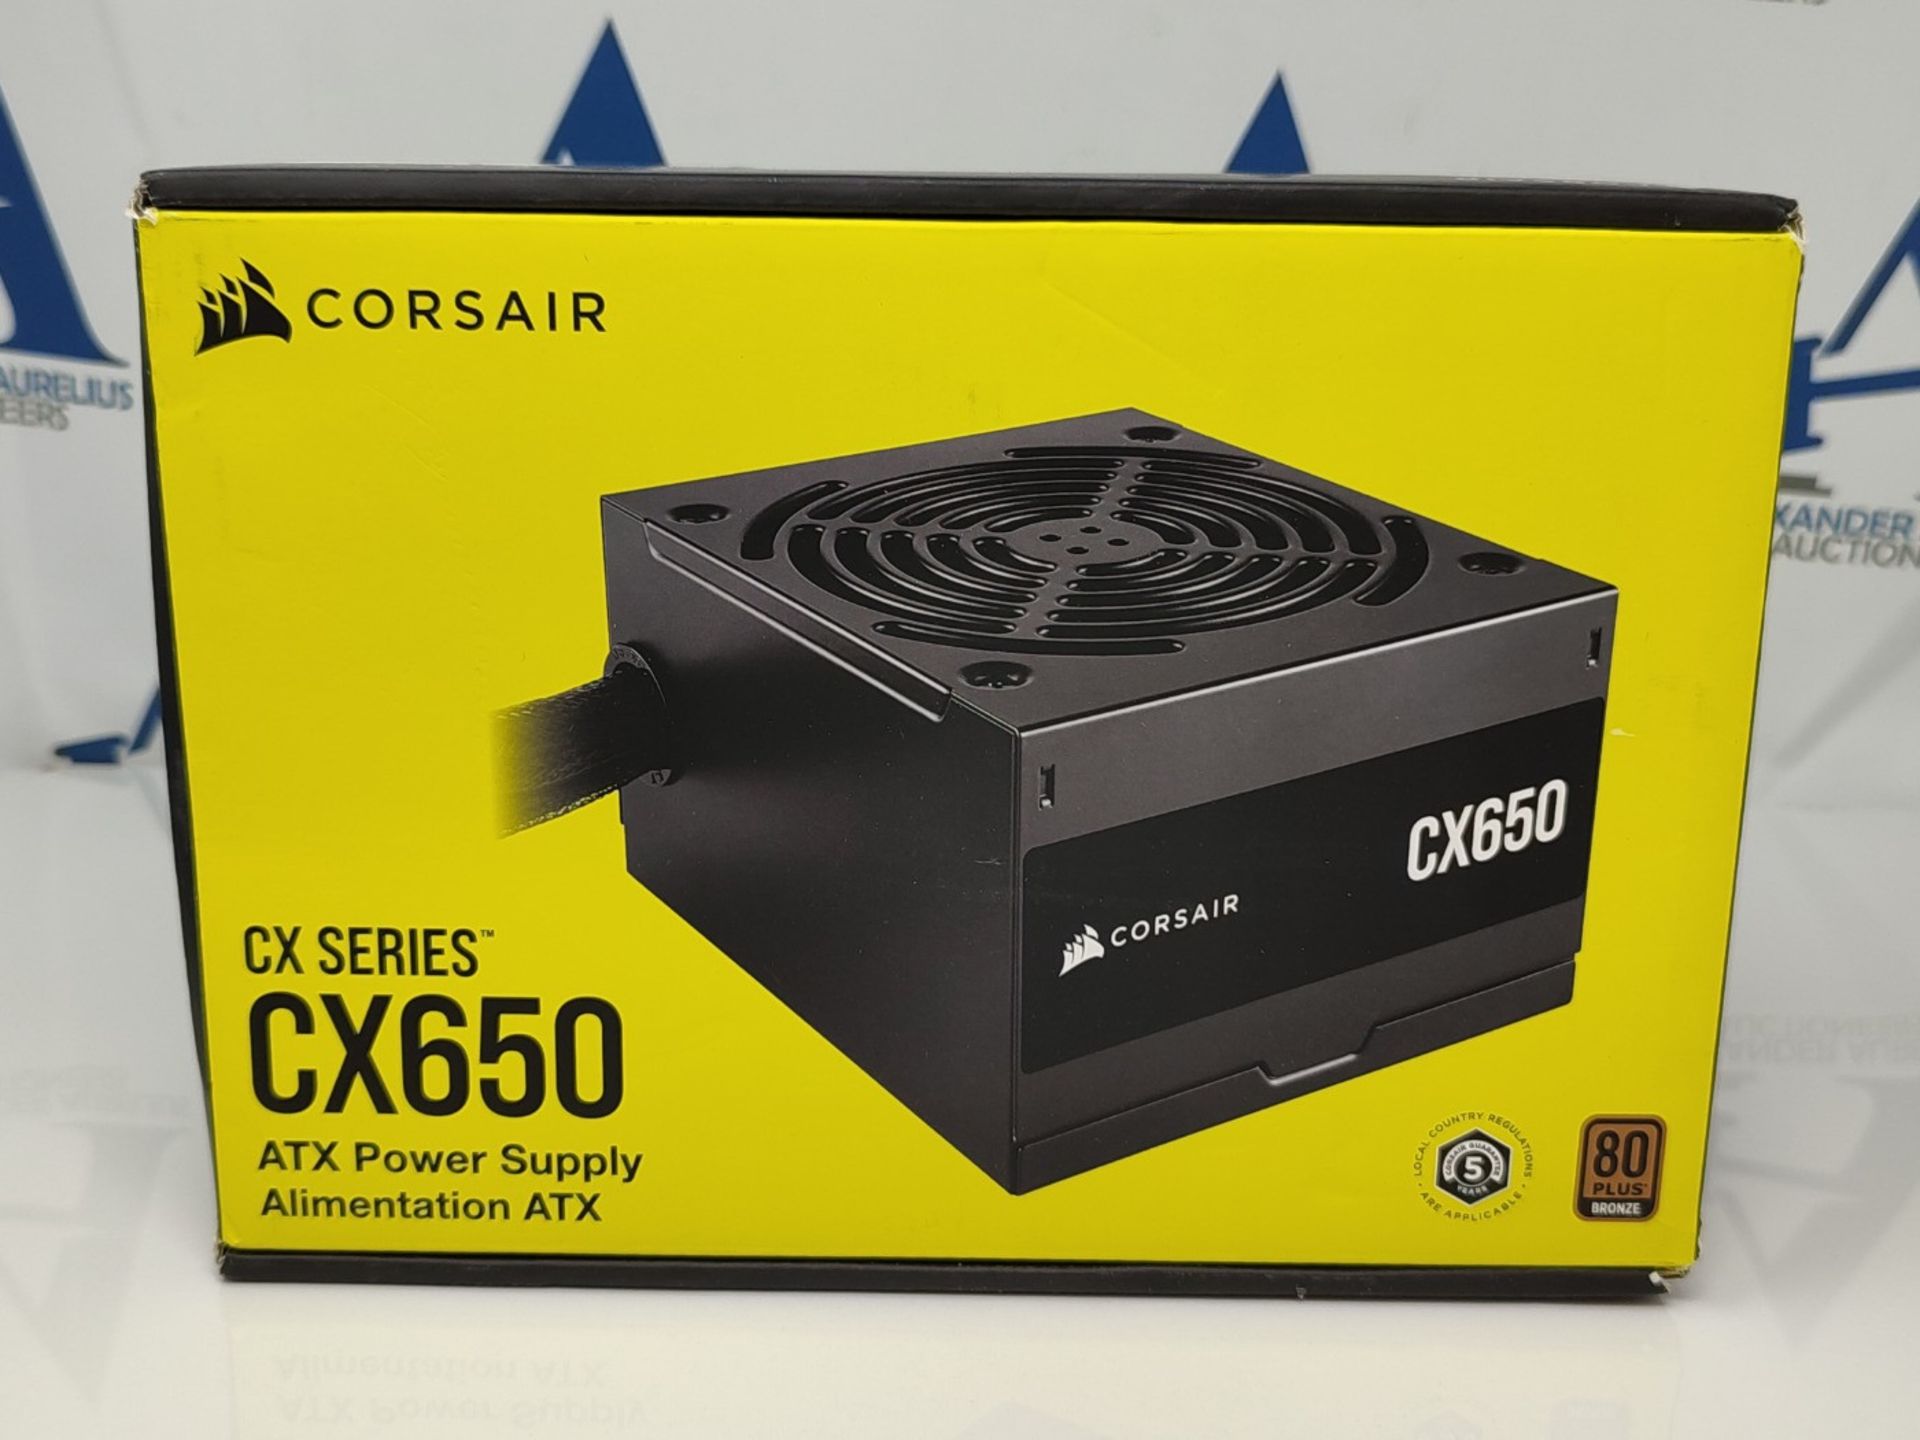 RRP £64.00 CORSAIR CX650 ATX 650W Power Supply - 80 Plus Bronze Certified - Low Noise - Sleeved C